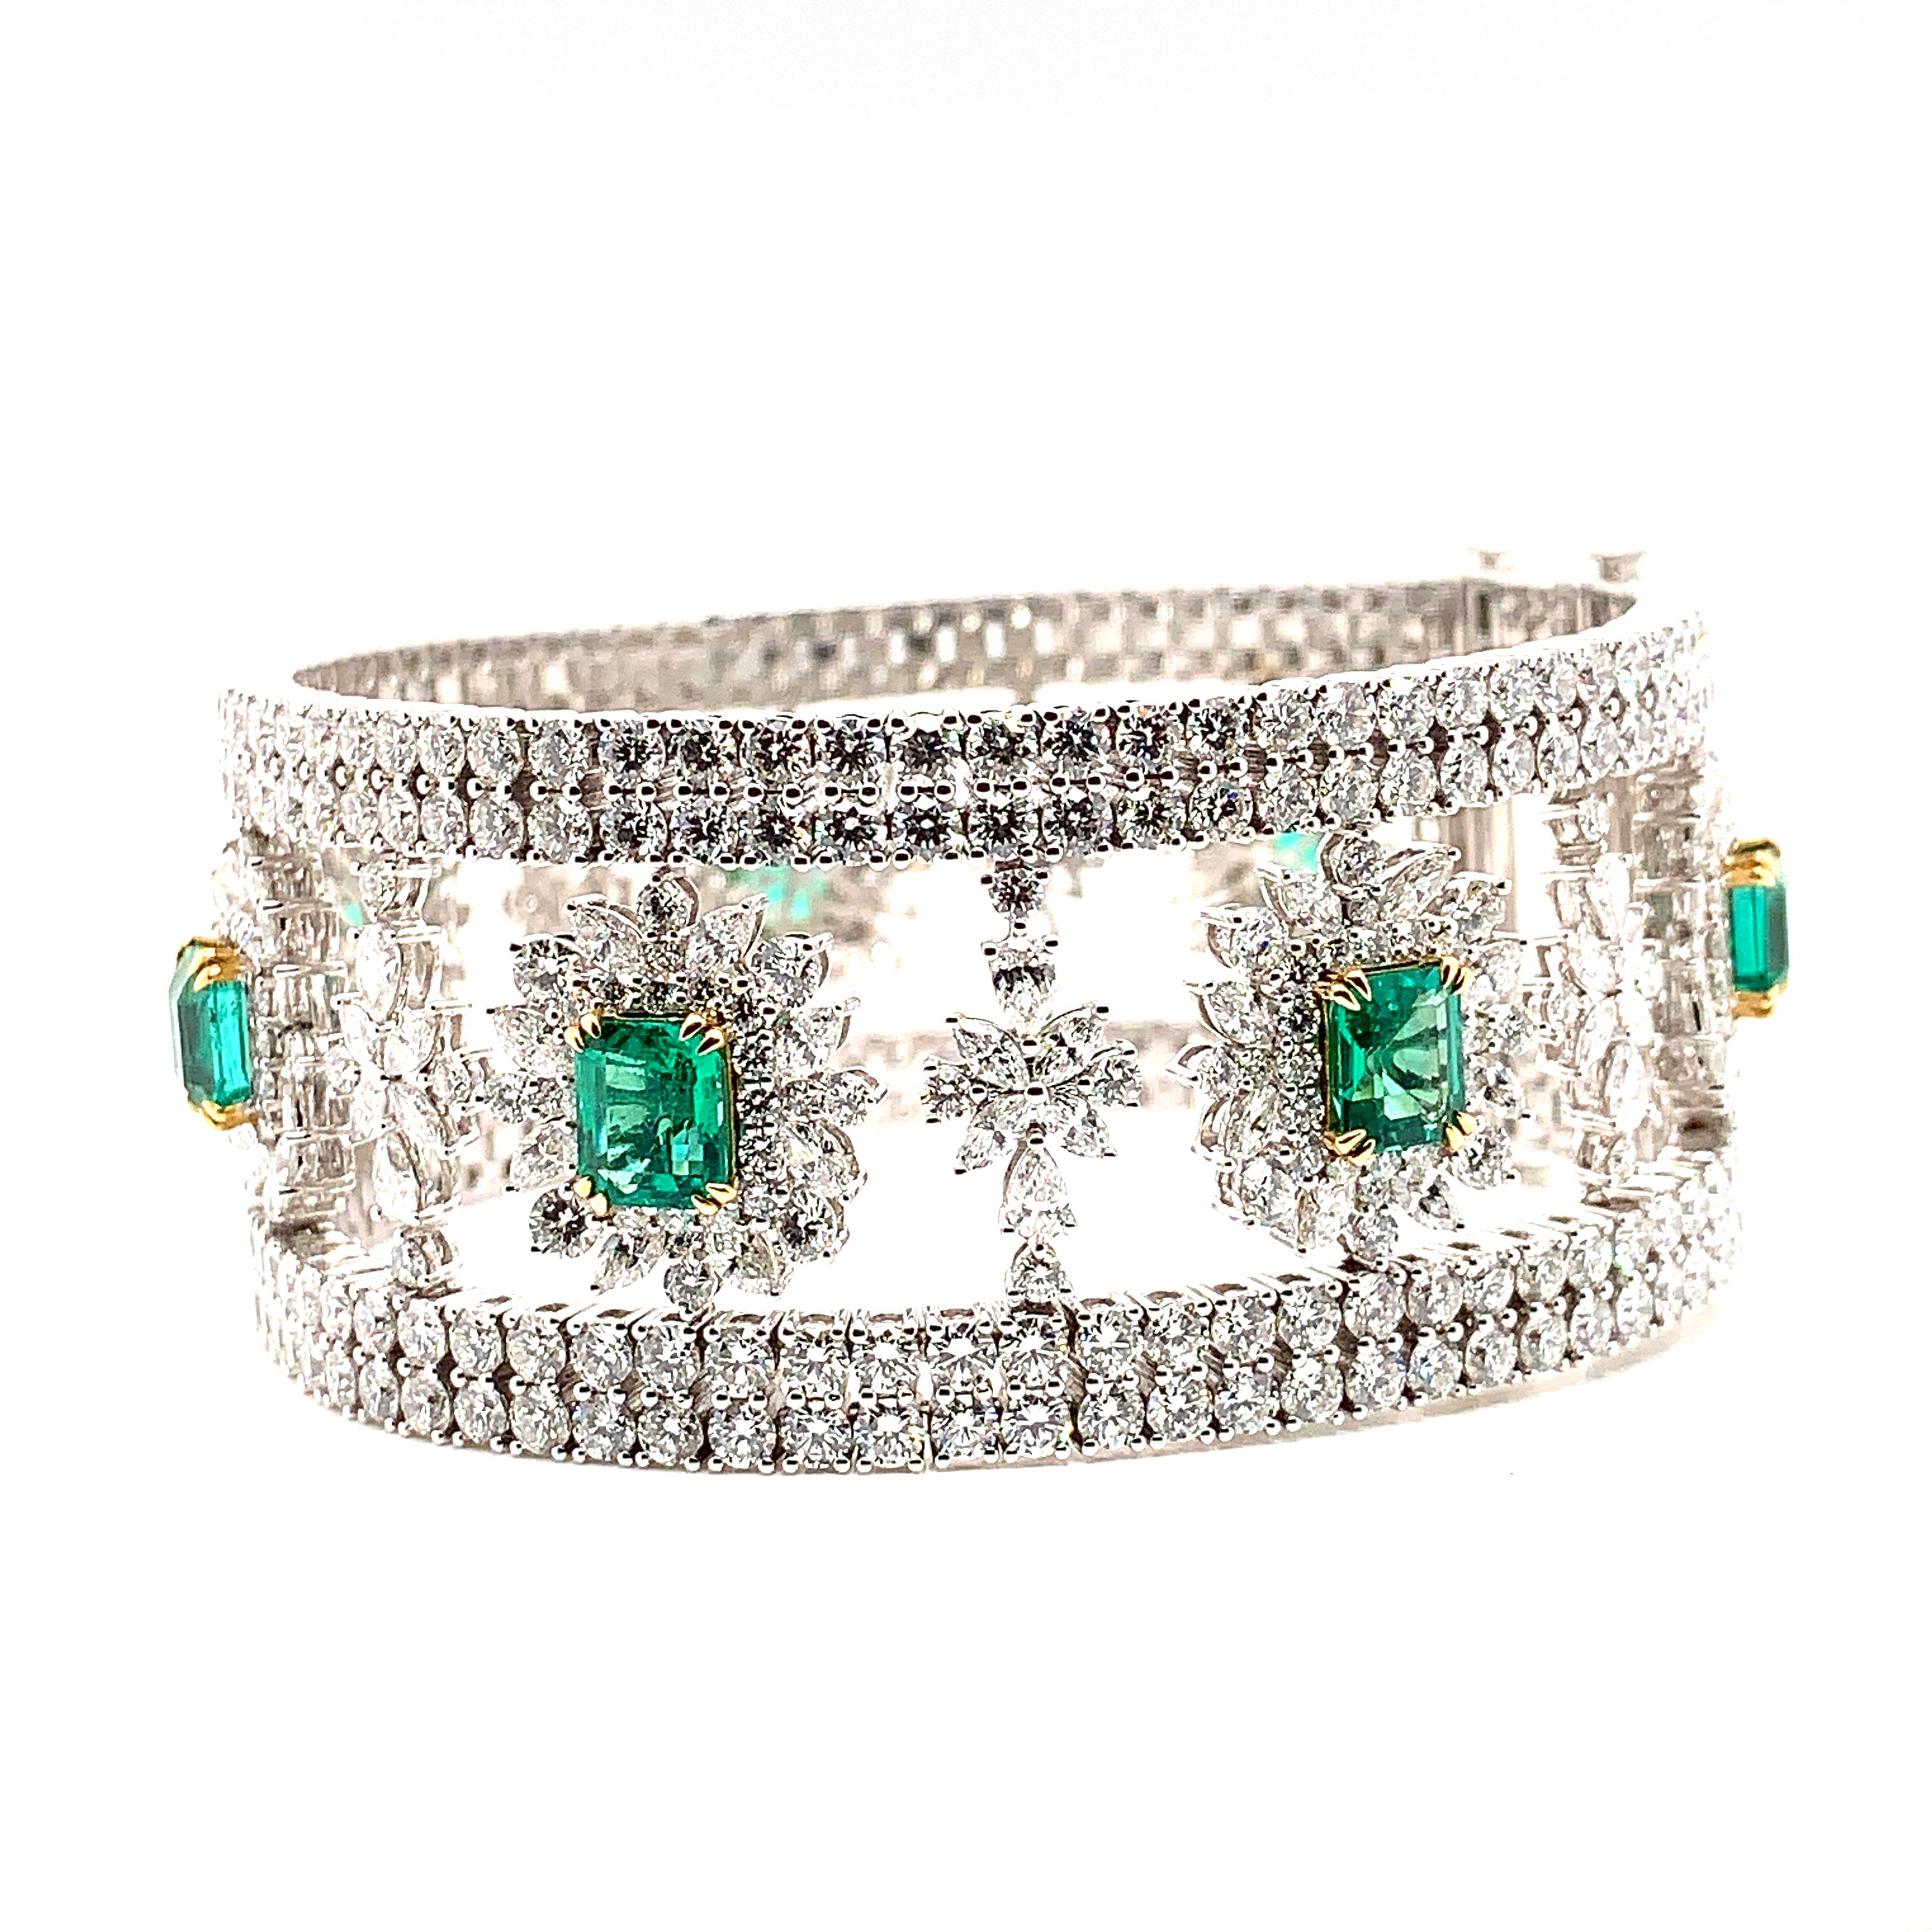 Contemporary 8.526 Carat Emerald Bracelet and Necklace in 18 Karat White Gold with Diamonds For Sale